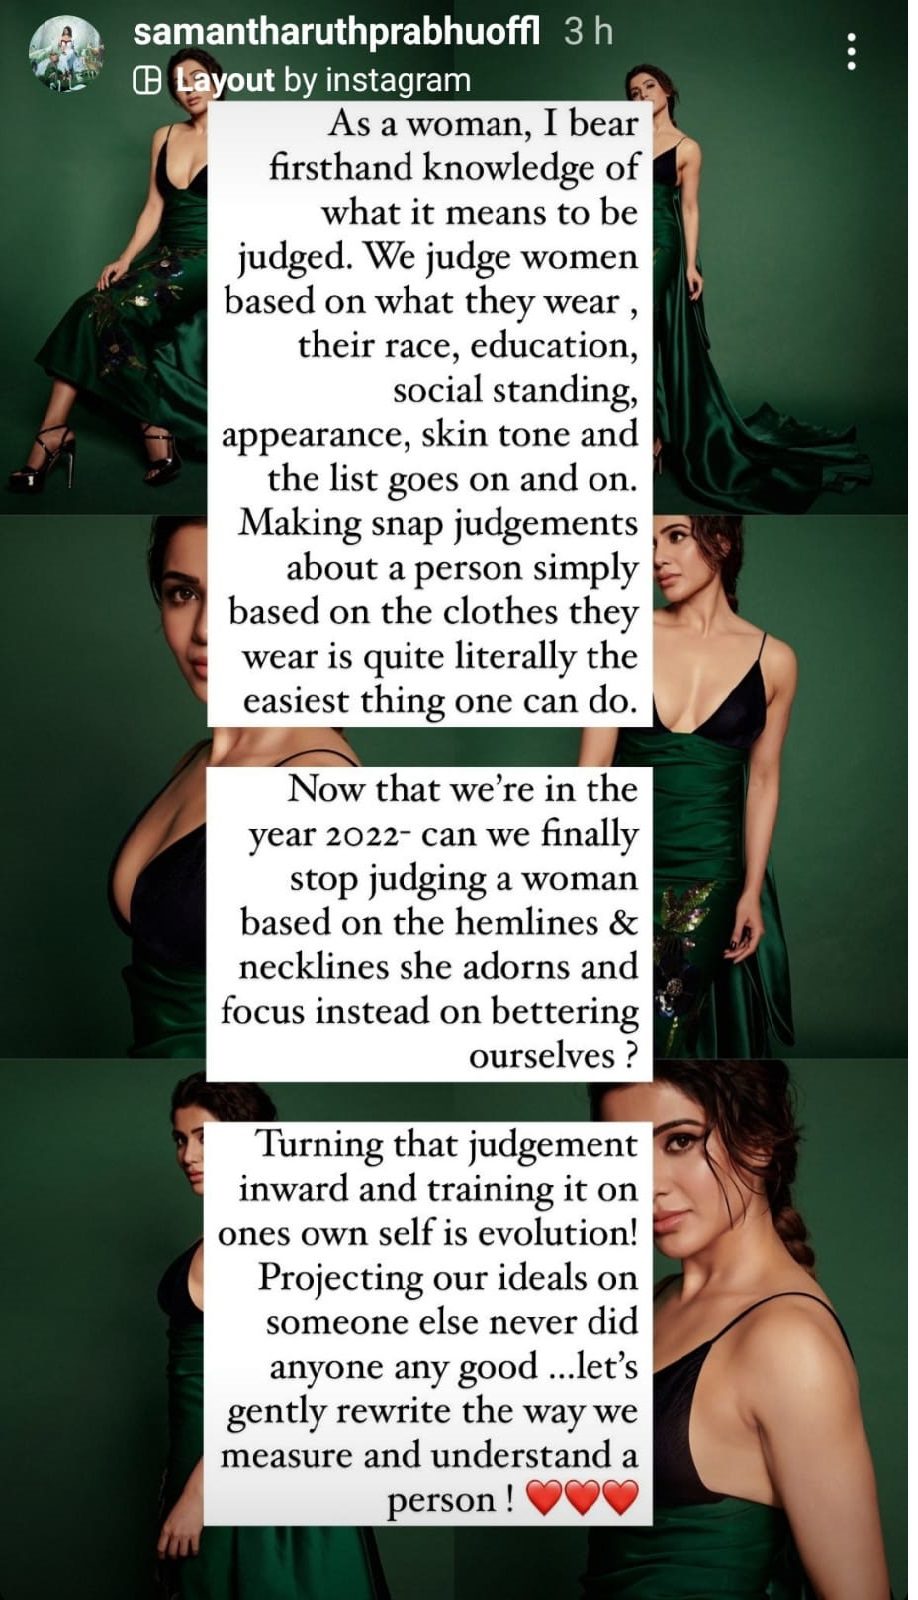 Stop judging a woman based on hemlines & necklines